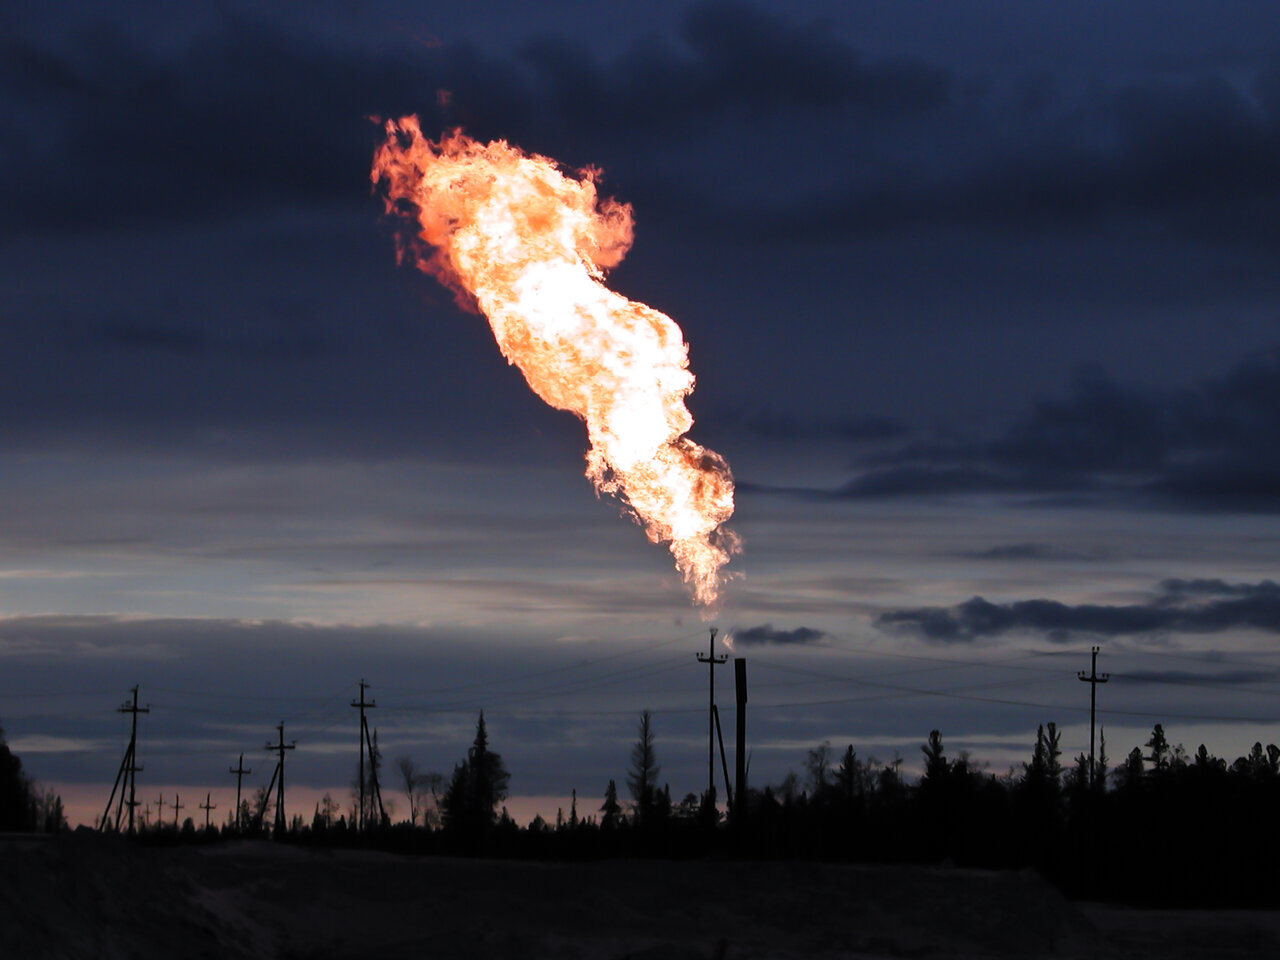 



Flaring, in which excess natural gas is intentionally burned into the air, is one way methane is released from oil and gas facilities. NASA’s EMIT mission, in more than a year in operation, has shown a proficiency at spotting emissions of methane and other greenhouse gases from space.

Credit: Adobe Stock/Ilya Glovatskiy 

